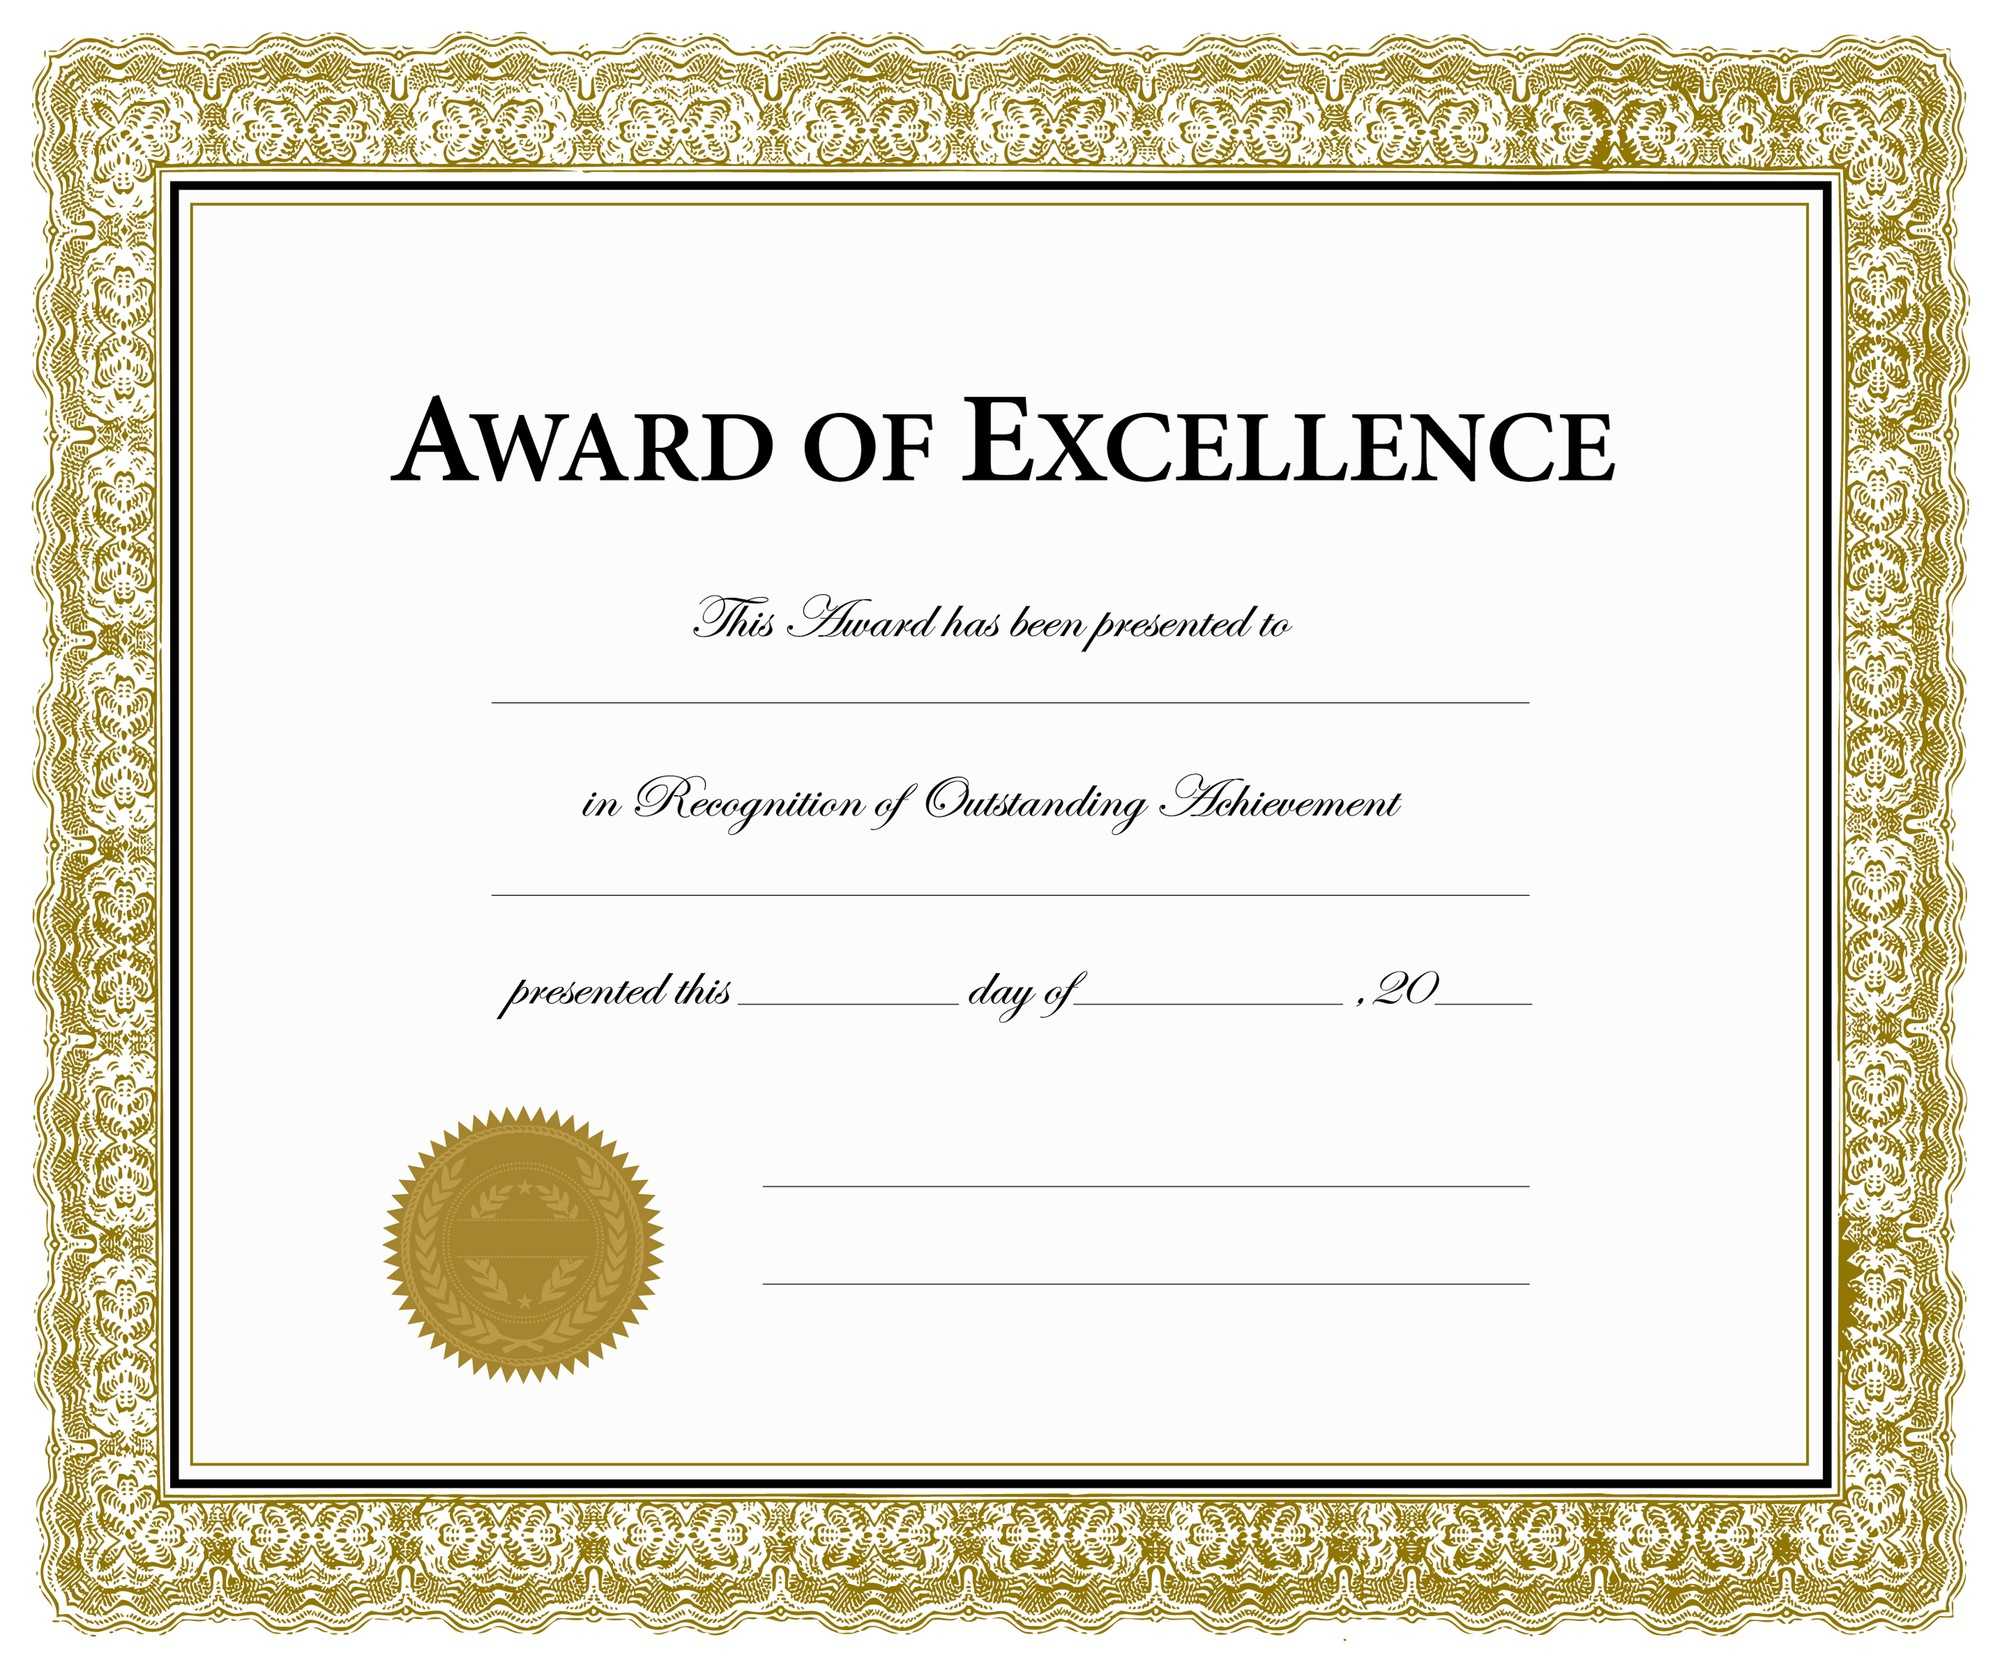 Certificates. Charming Award Of Excellence Certificate With Award Of Excellence Certificate Template